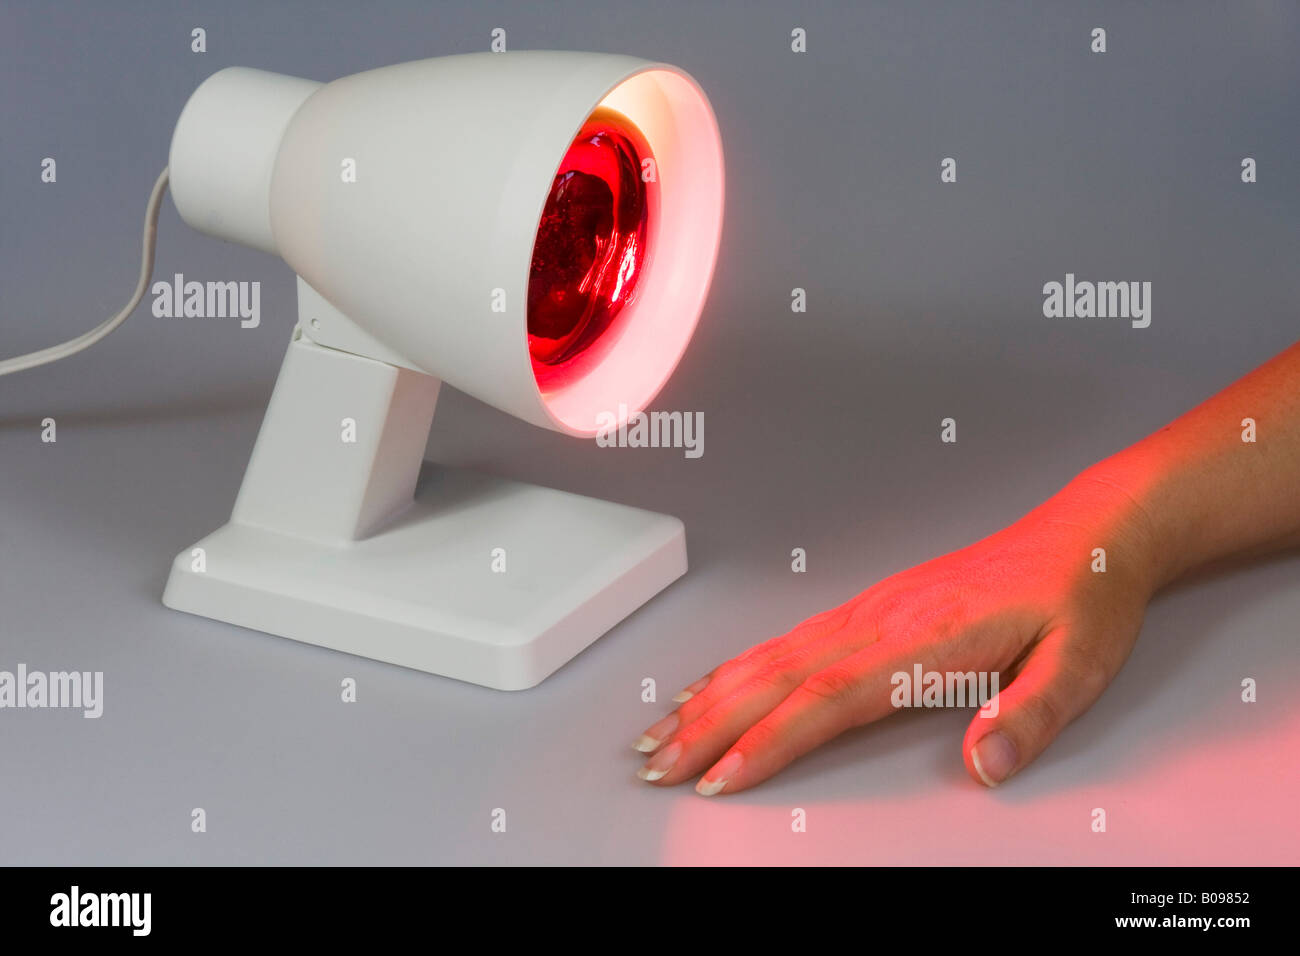 Infrared light beaming at a hand Stock Photo